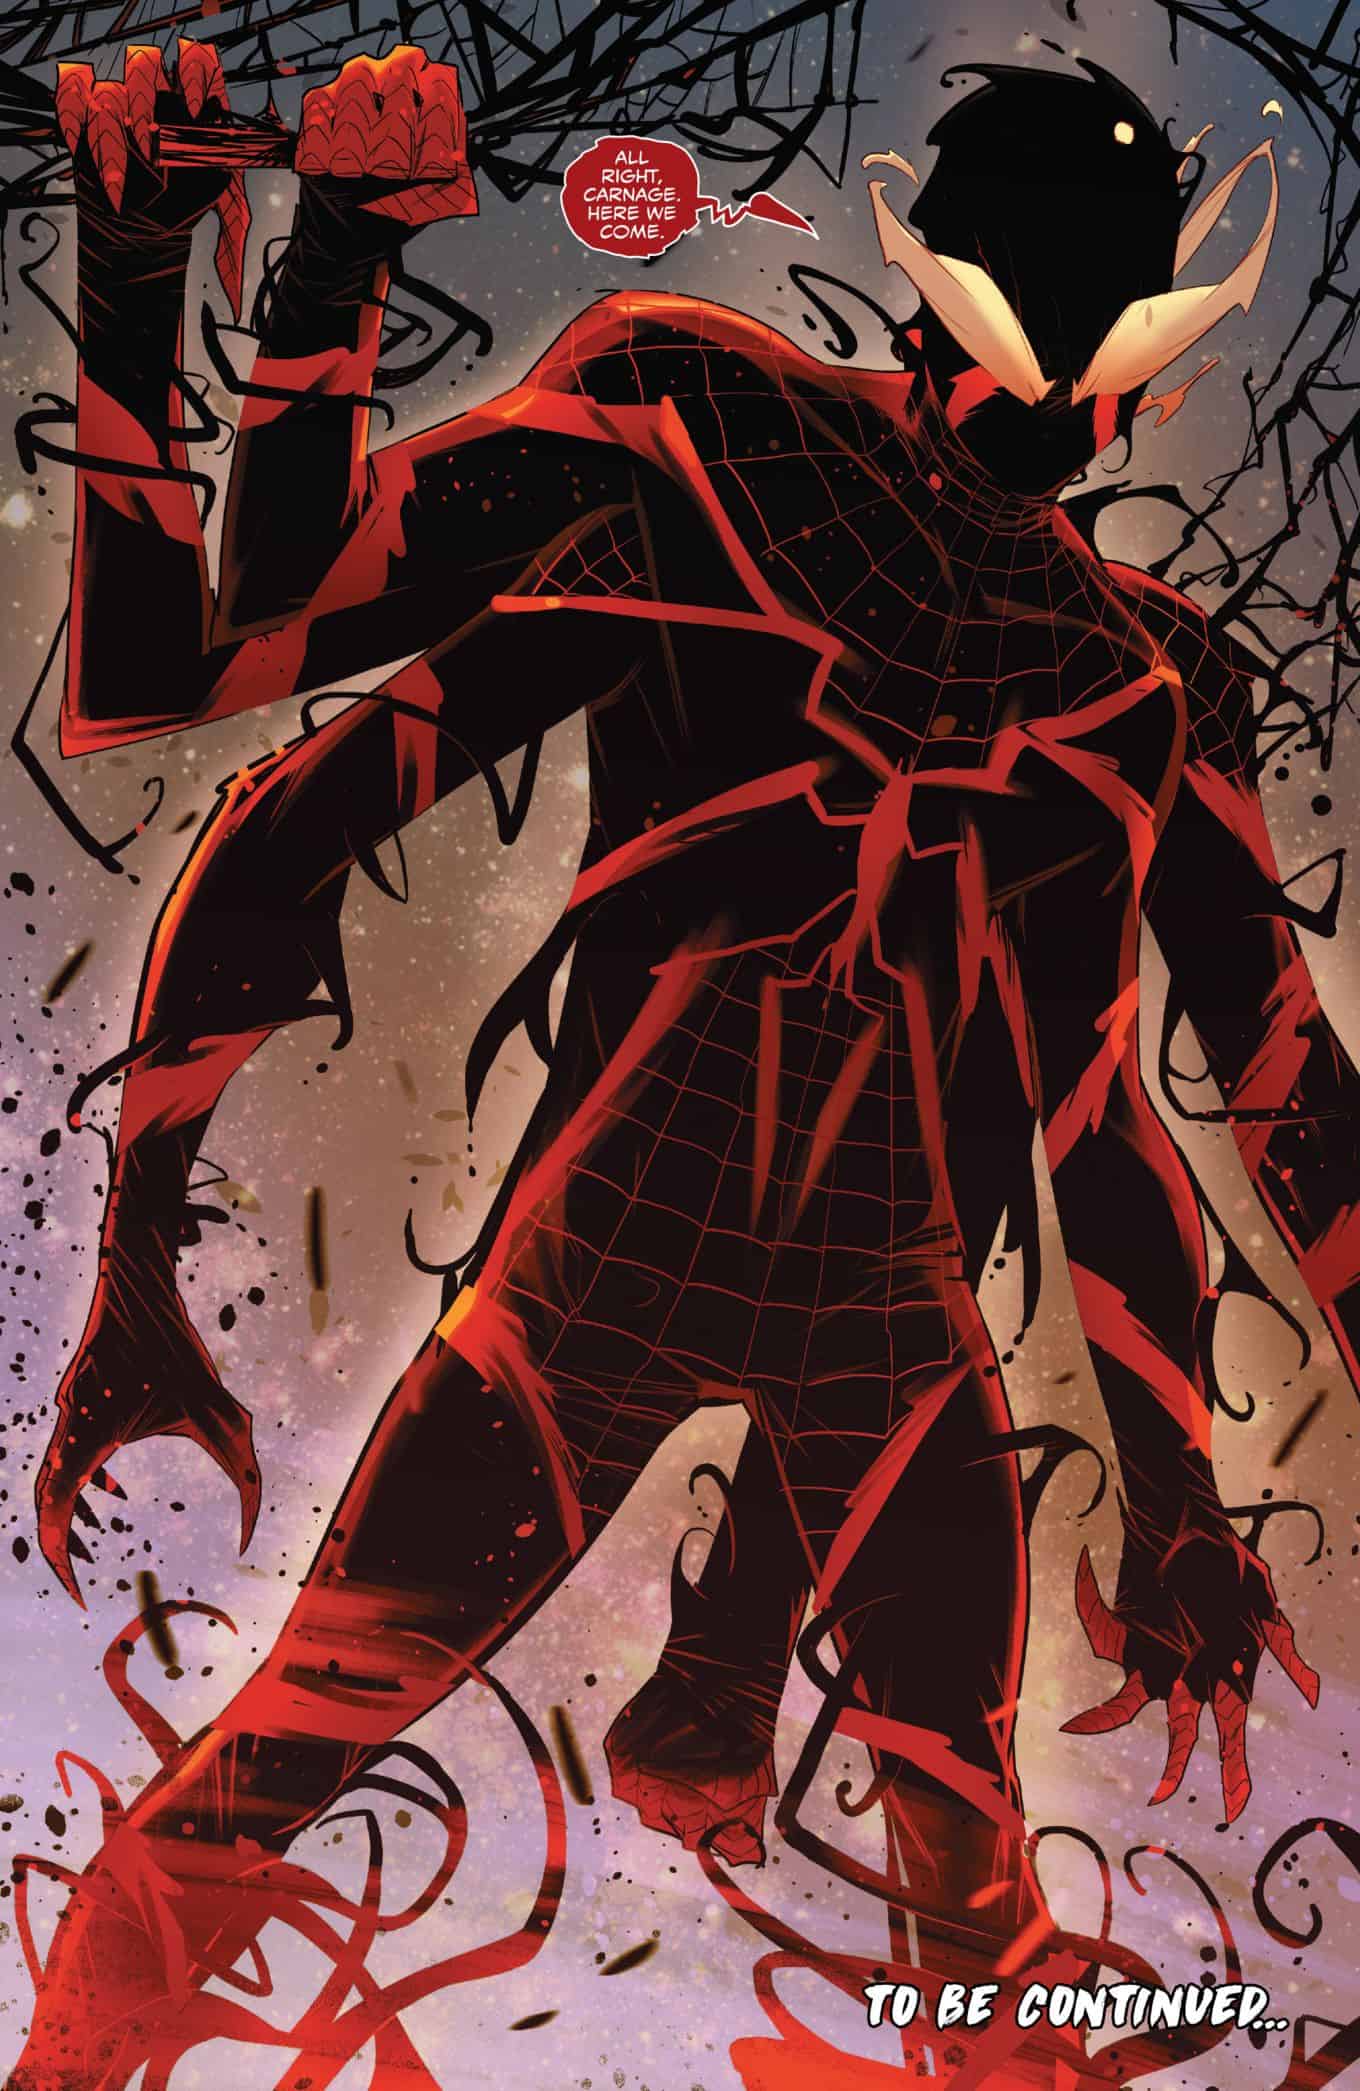 Marvel Comics Universe & Absolute Carnage Miles Morales 3 Spoilers